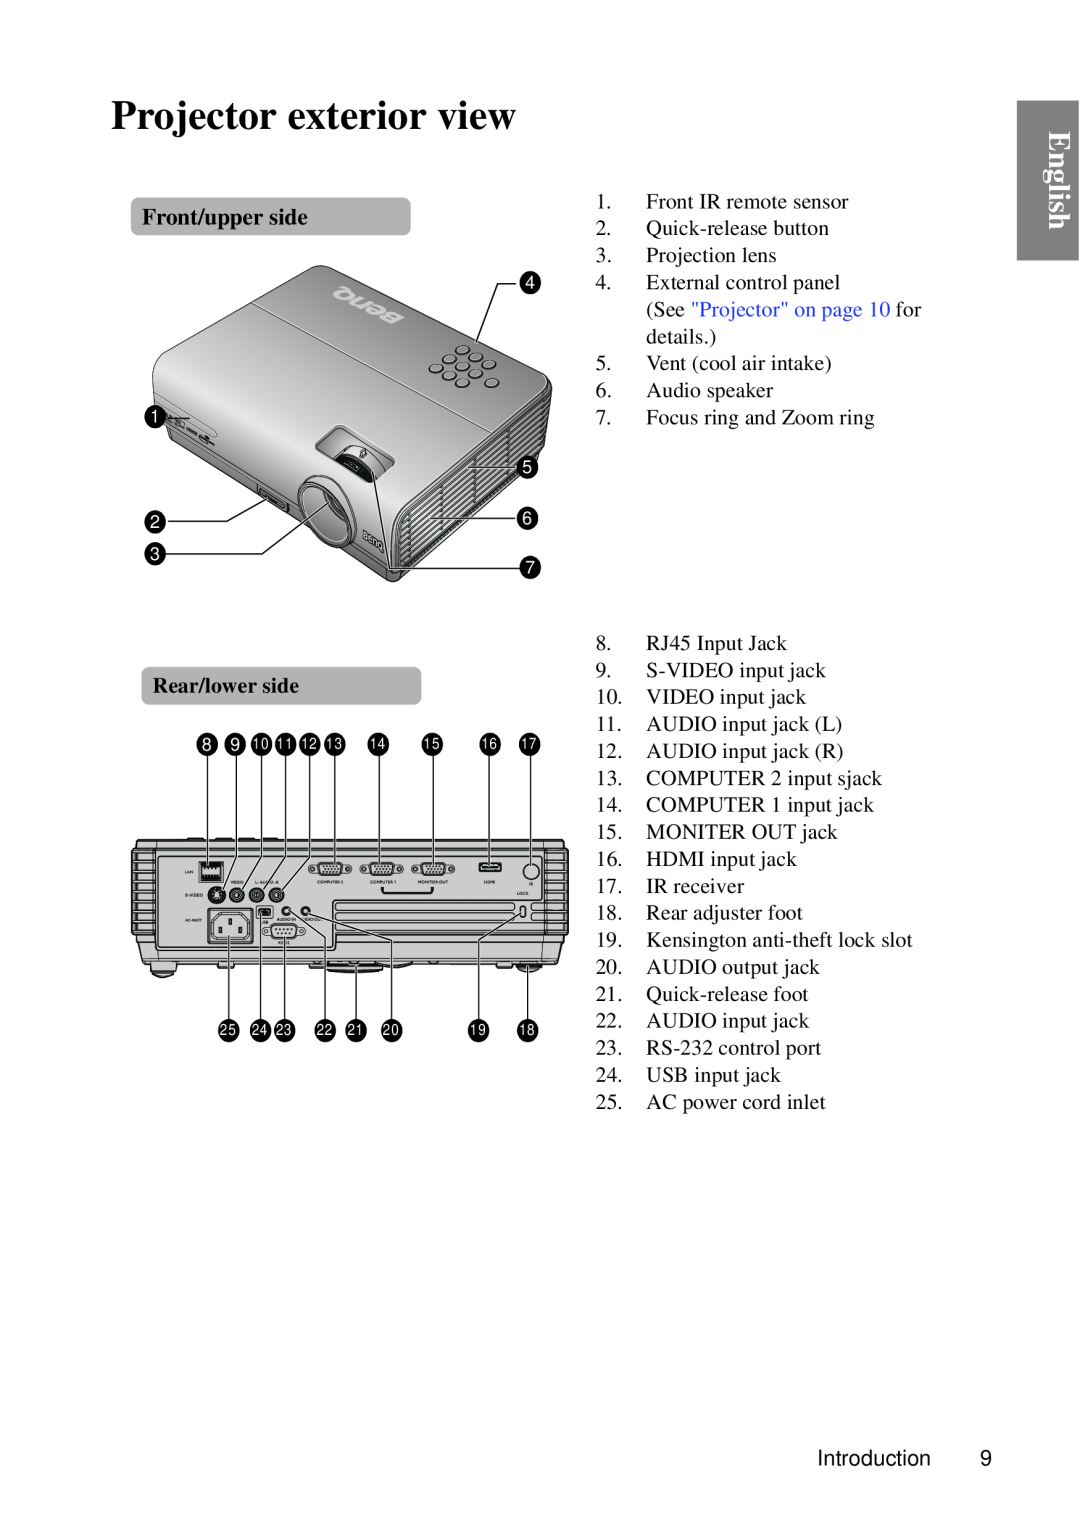 BenQ MP670 user manual Projector exterior view, English, Front/upper side 